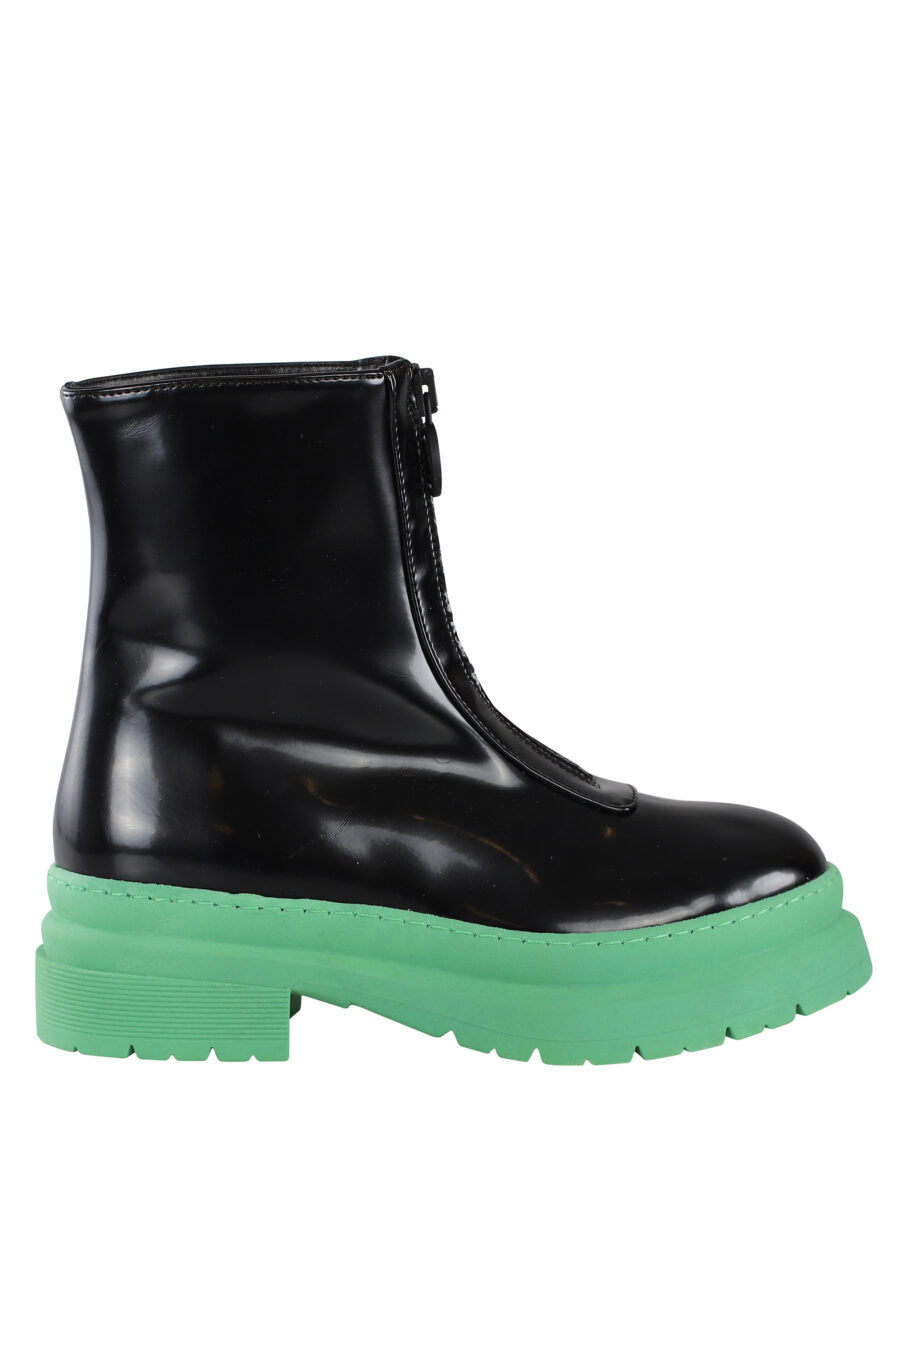 Black vegan leather ankle boots with green sole - IMG 6871